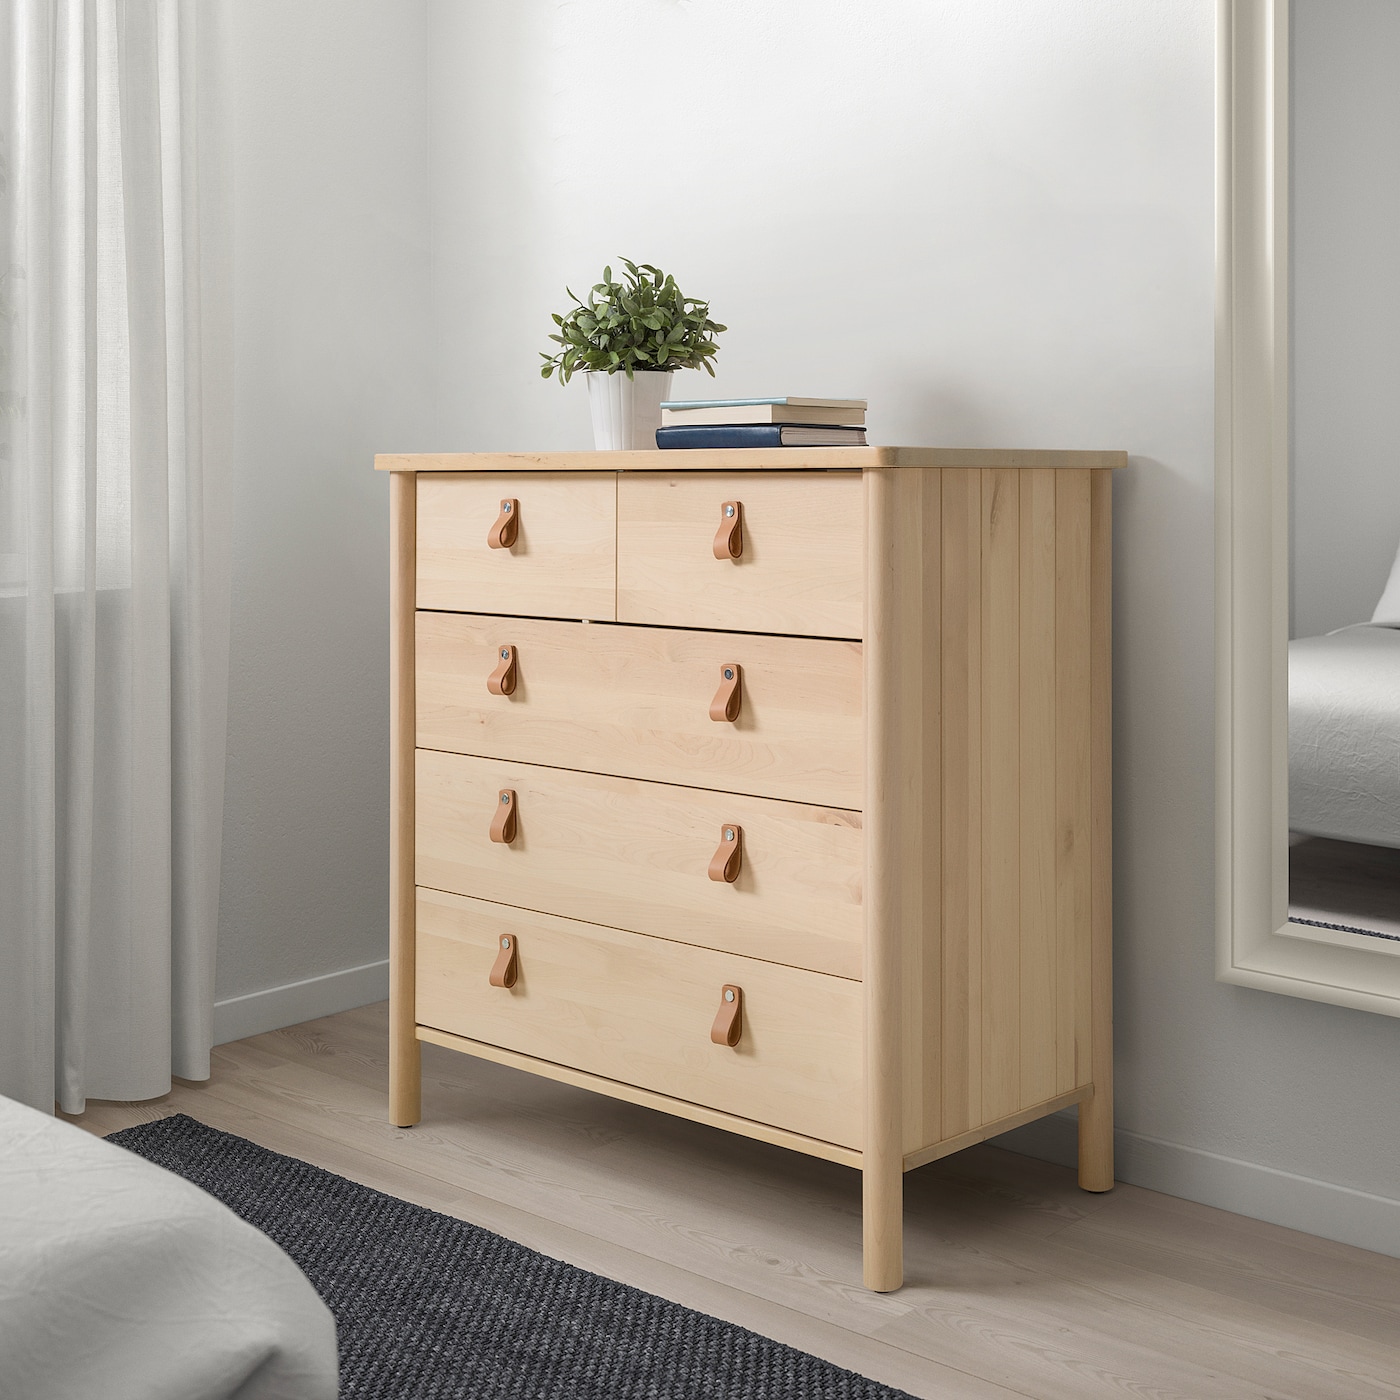 ikea 5 drawer chest of drawers